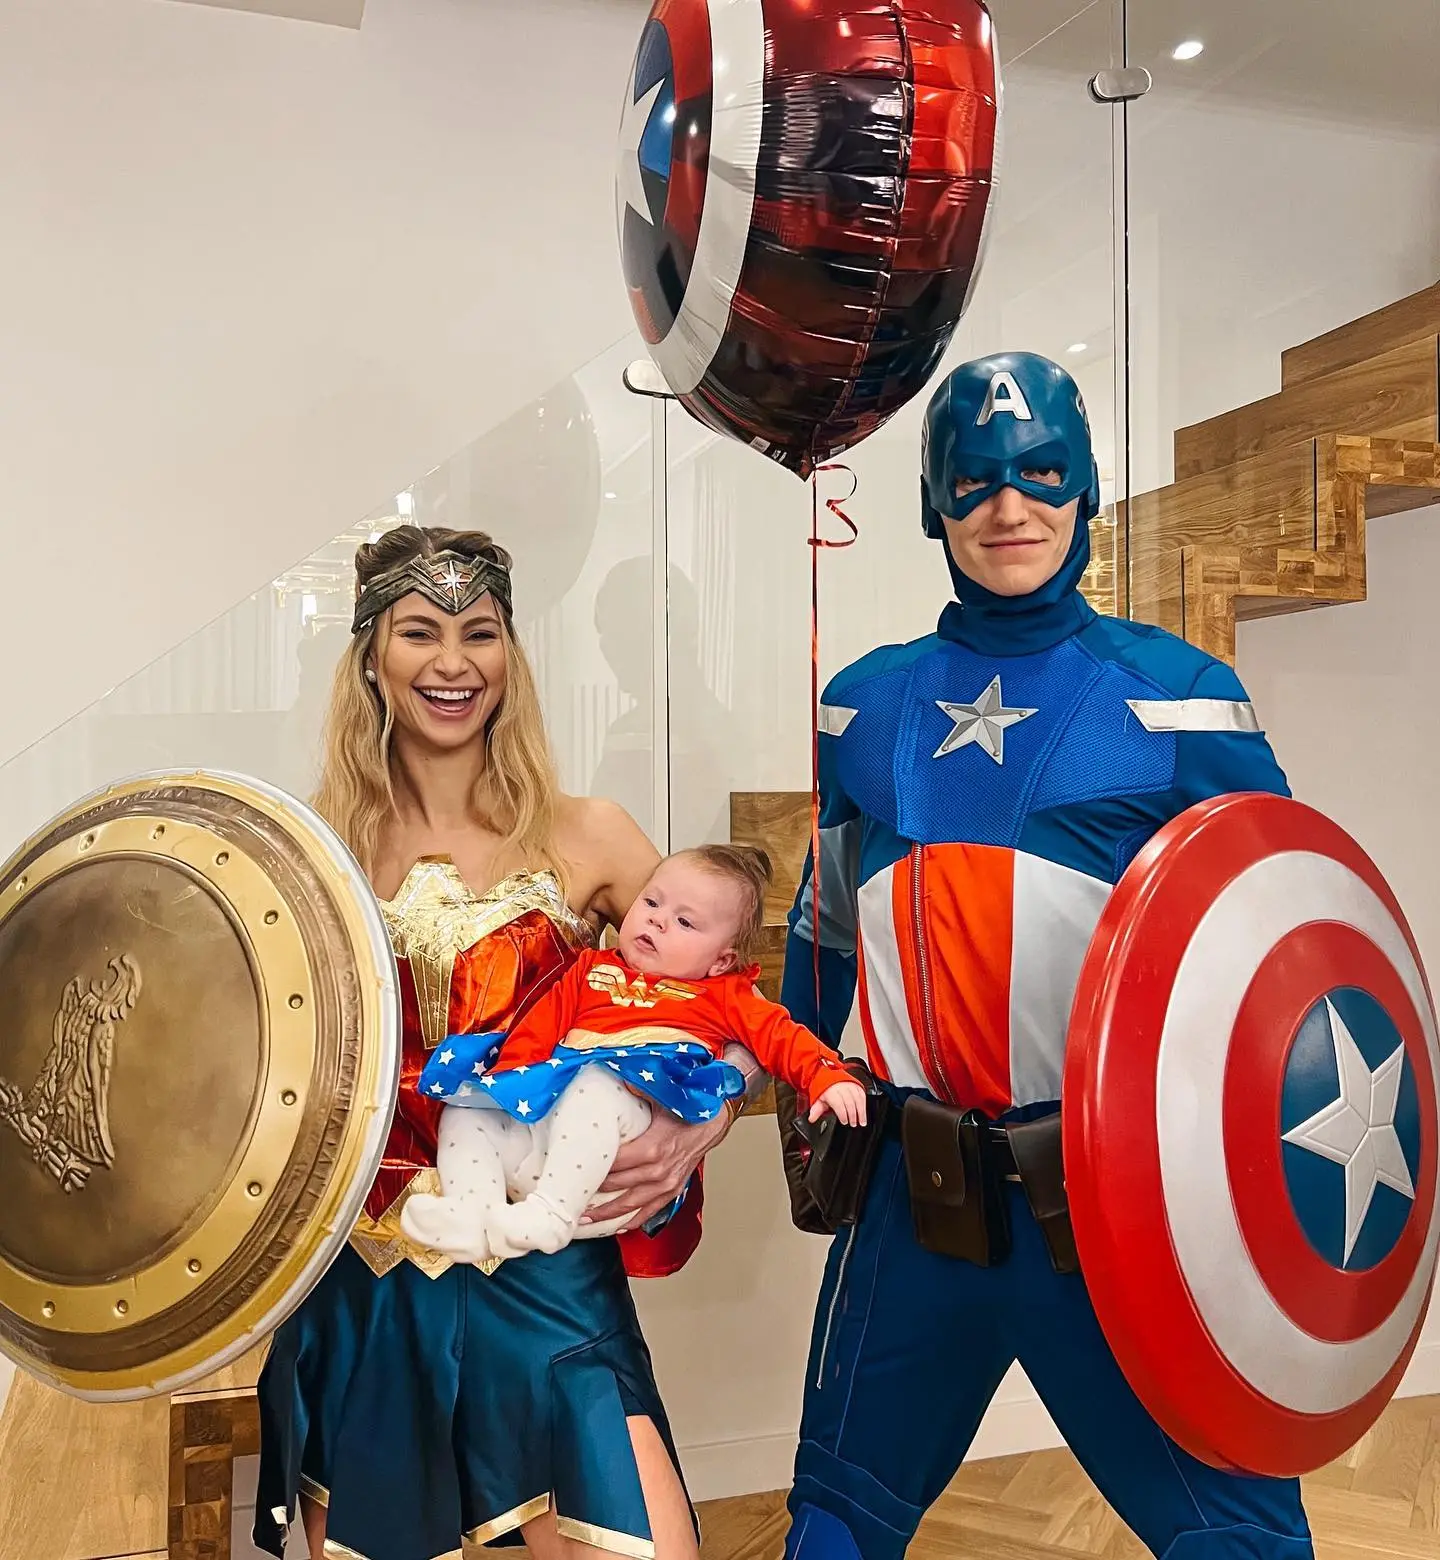 family of 3 Halloween costumes + Marvel family costumes with baby girl